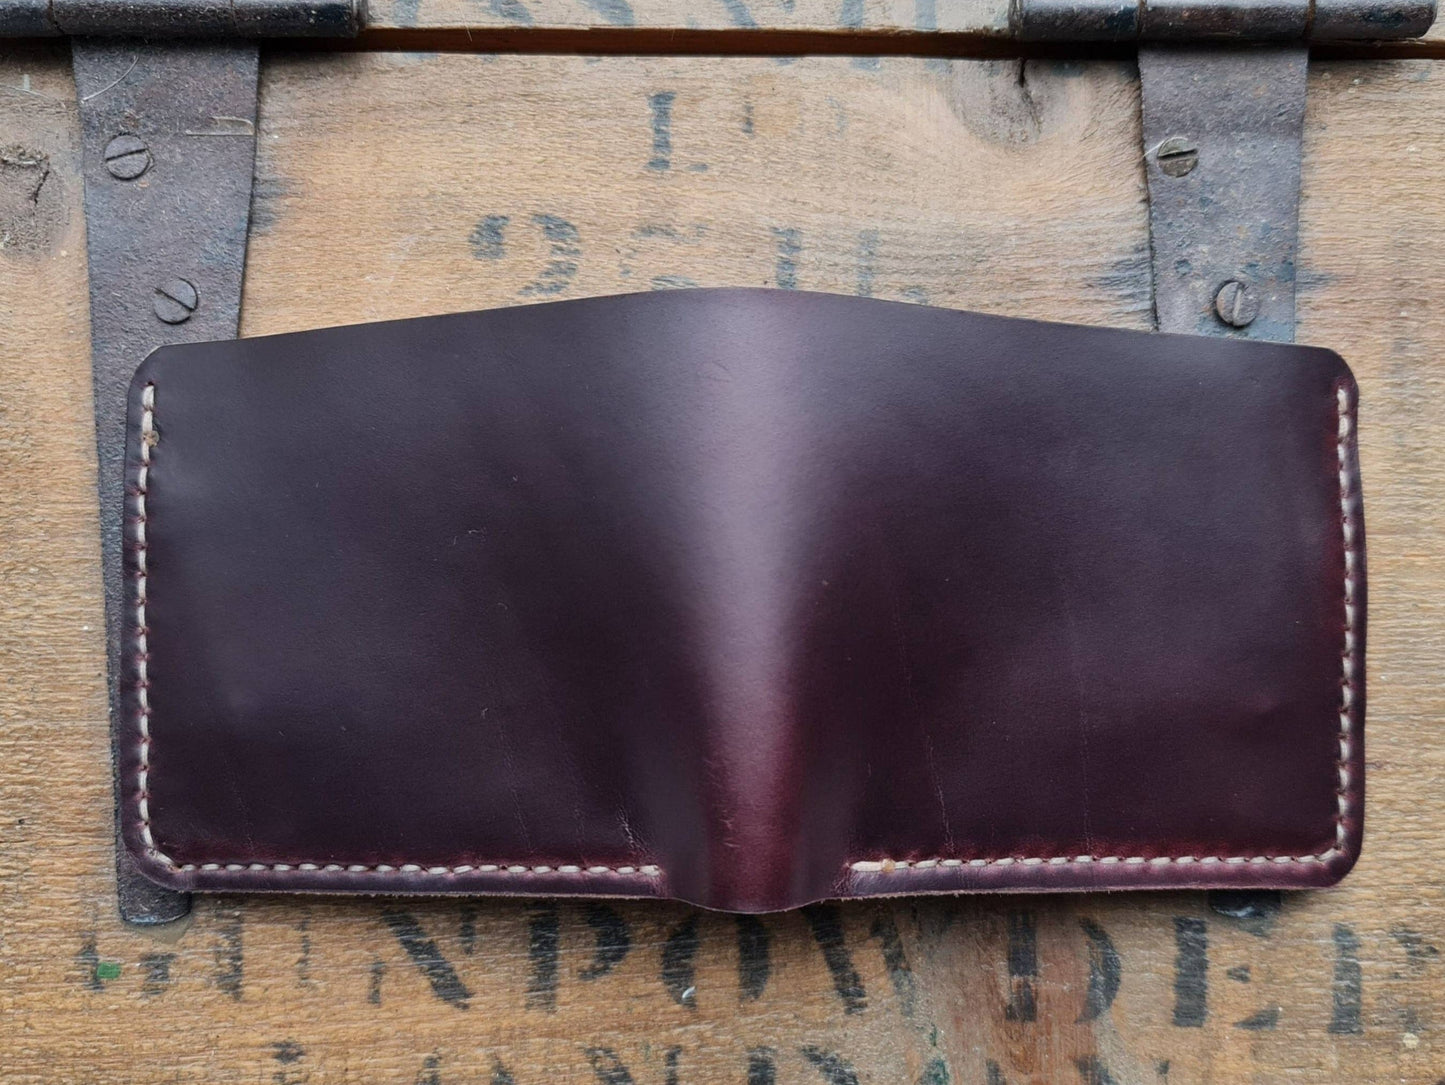 No. 2 Frontiersman Leather Bifold Wallet, Horween Burgundy Chromexcel Leather, Back Open